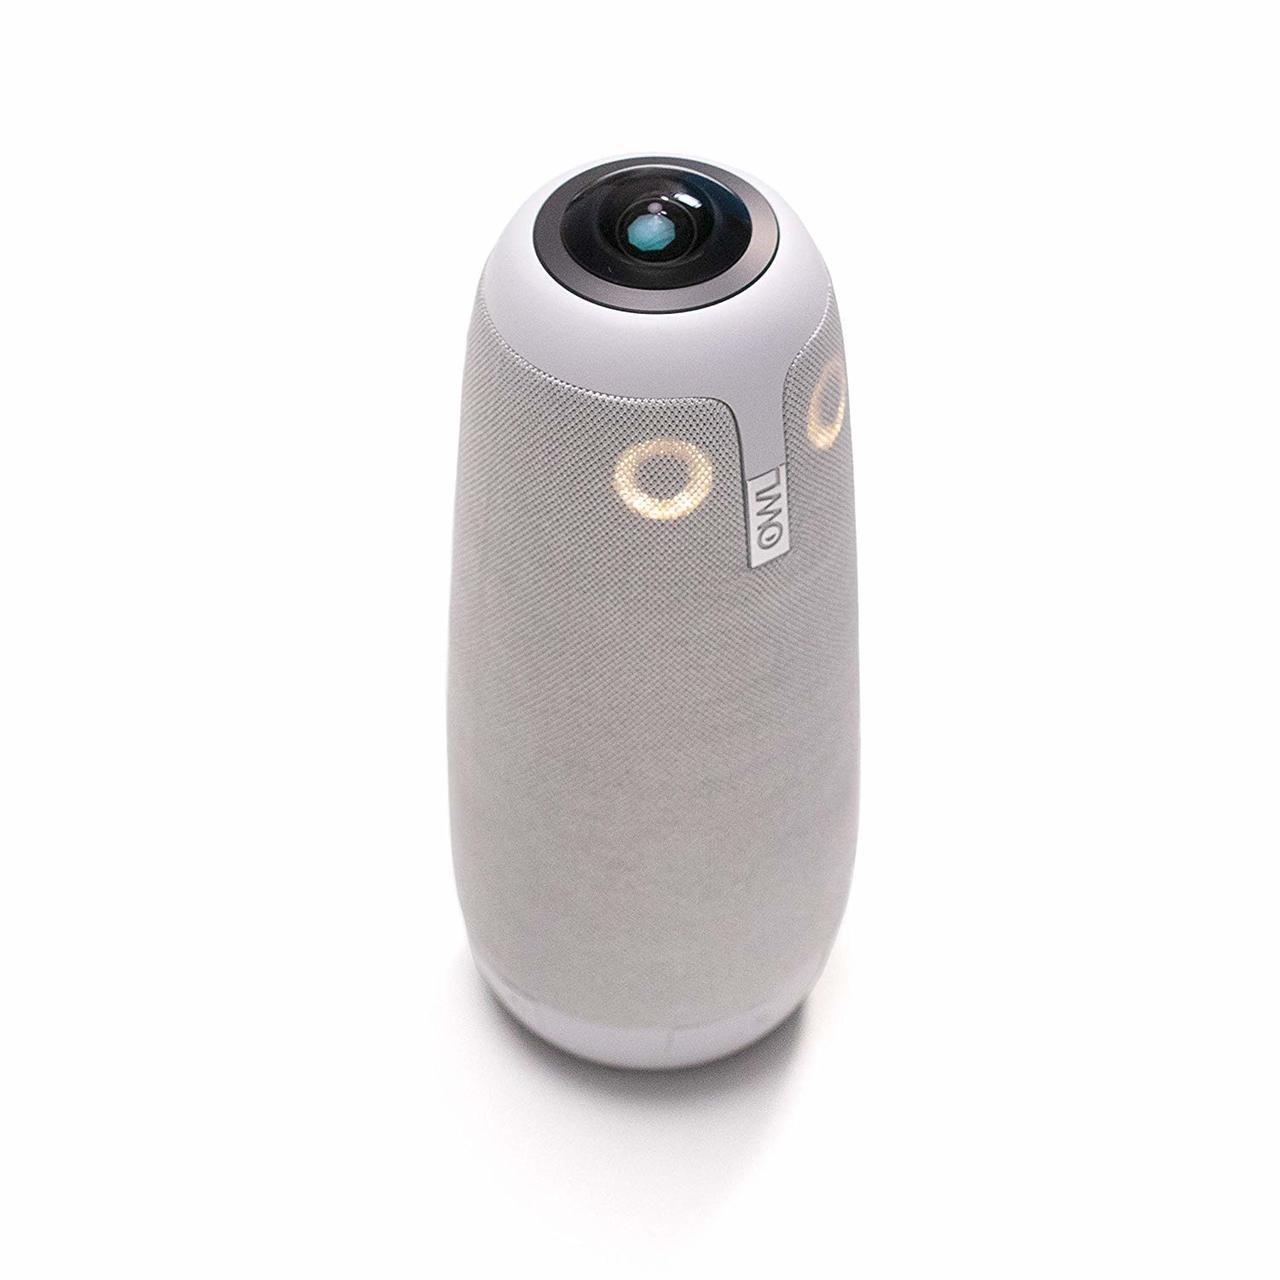 Owl Labs Meeting OWL Pro 360 Degree 1080p Smart Video Conference Camera White MTW200-1000